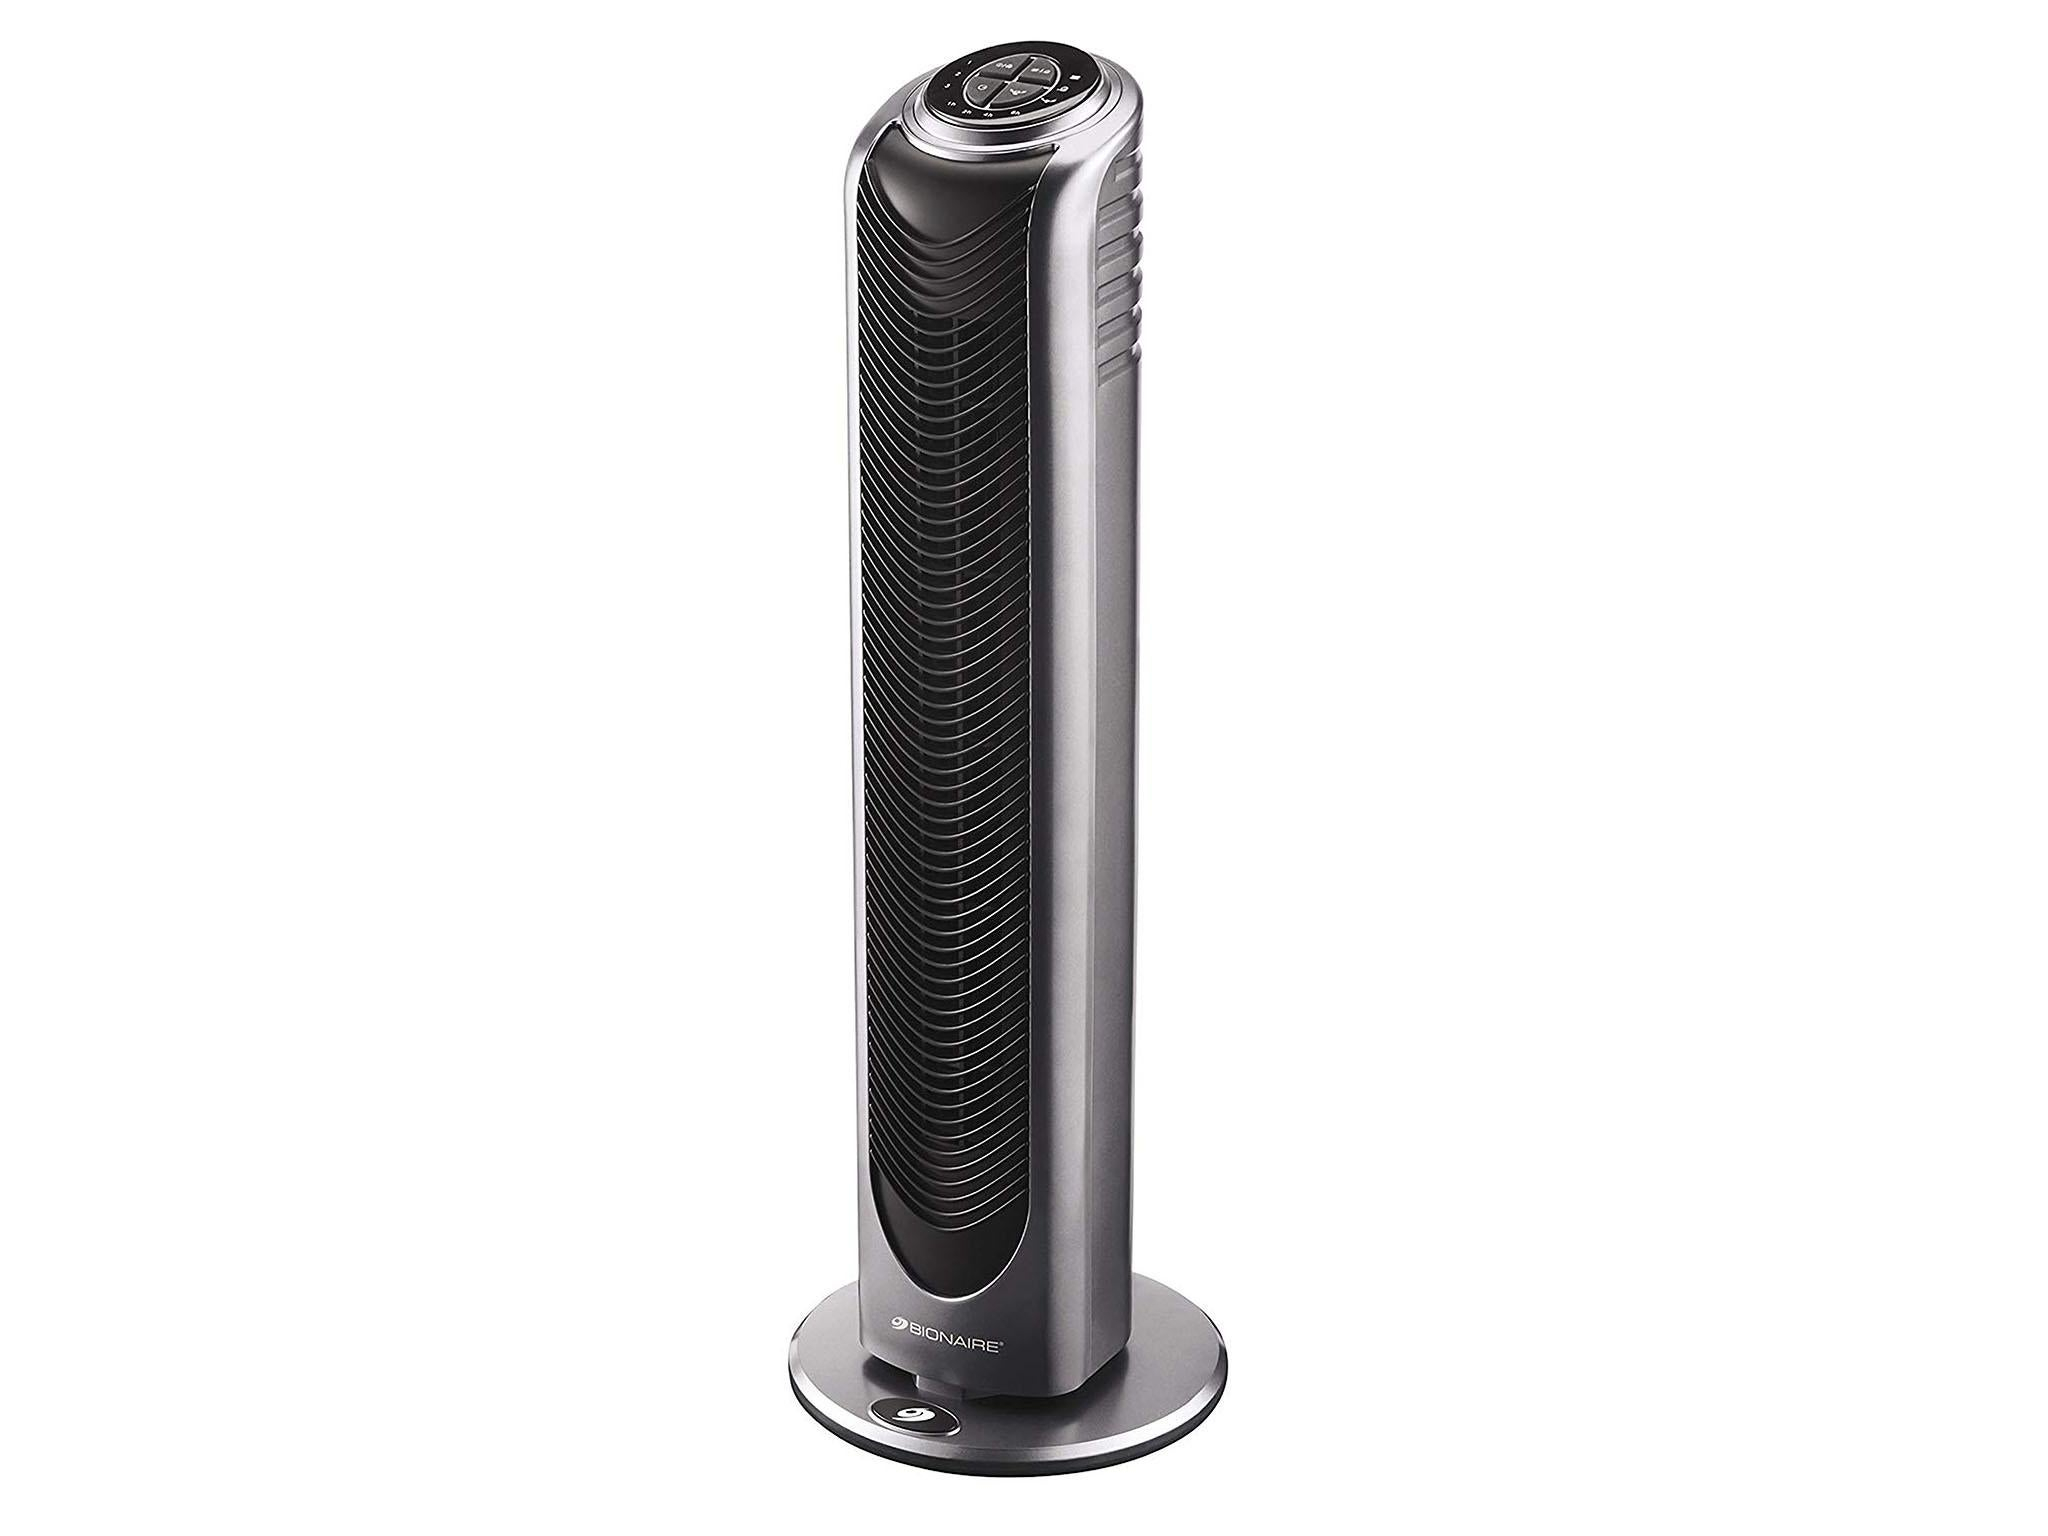 Httpsstaticindependentcouks3fs Publicthumbnailsimage2019060510bionaire Ocillating Tower Fan With Remote Control And Timer intended for dimensions 2048 X 1536